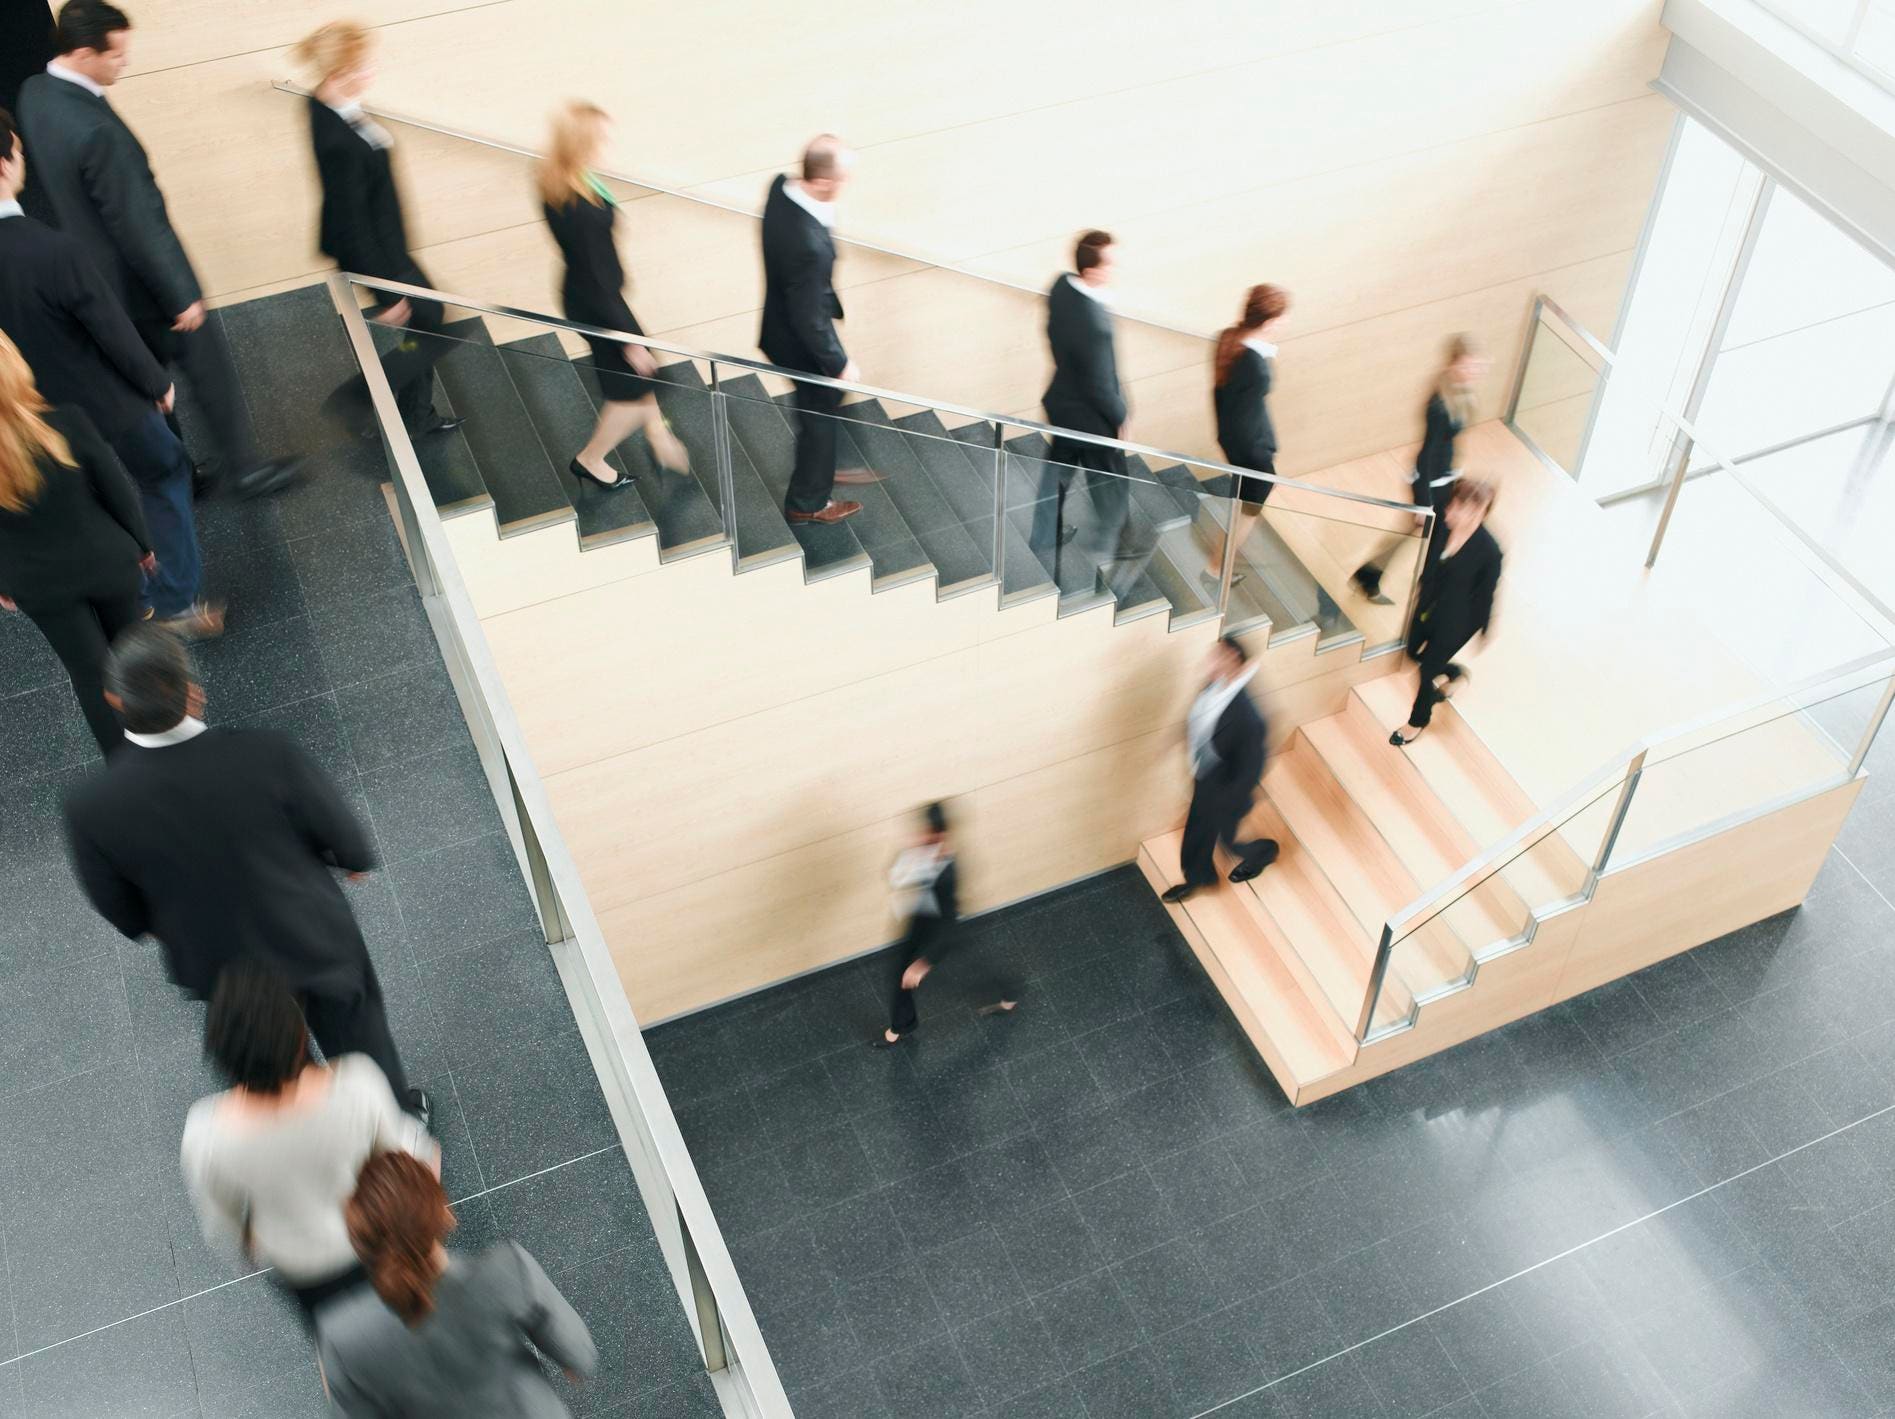 Employee Exodus: Why Employees Leave and What HR Can Do About It - eSkill